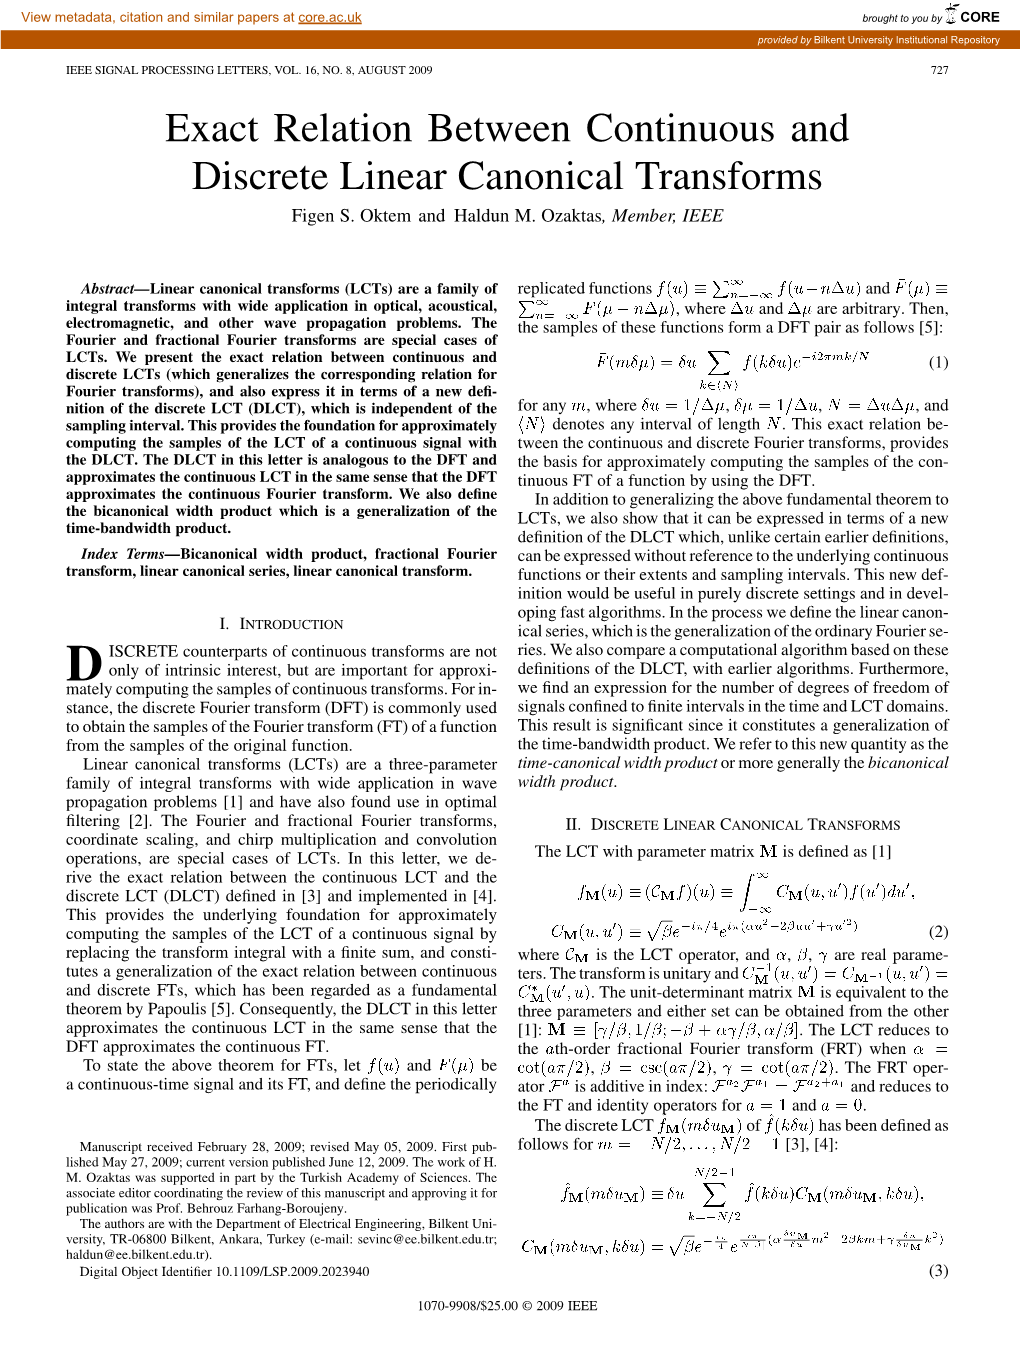 Exact Relation Between Continuous and Discrete Linear Canonical Transforms Figen S